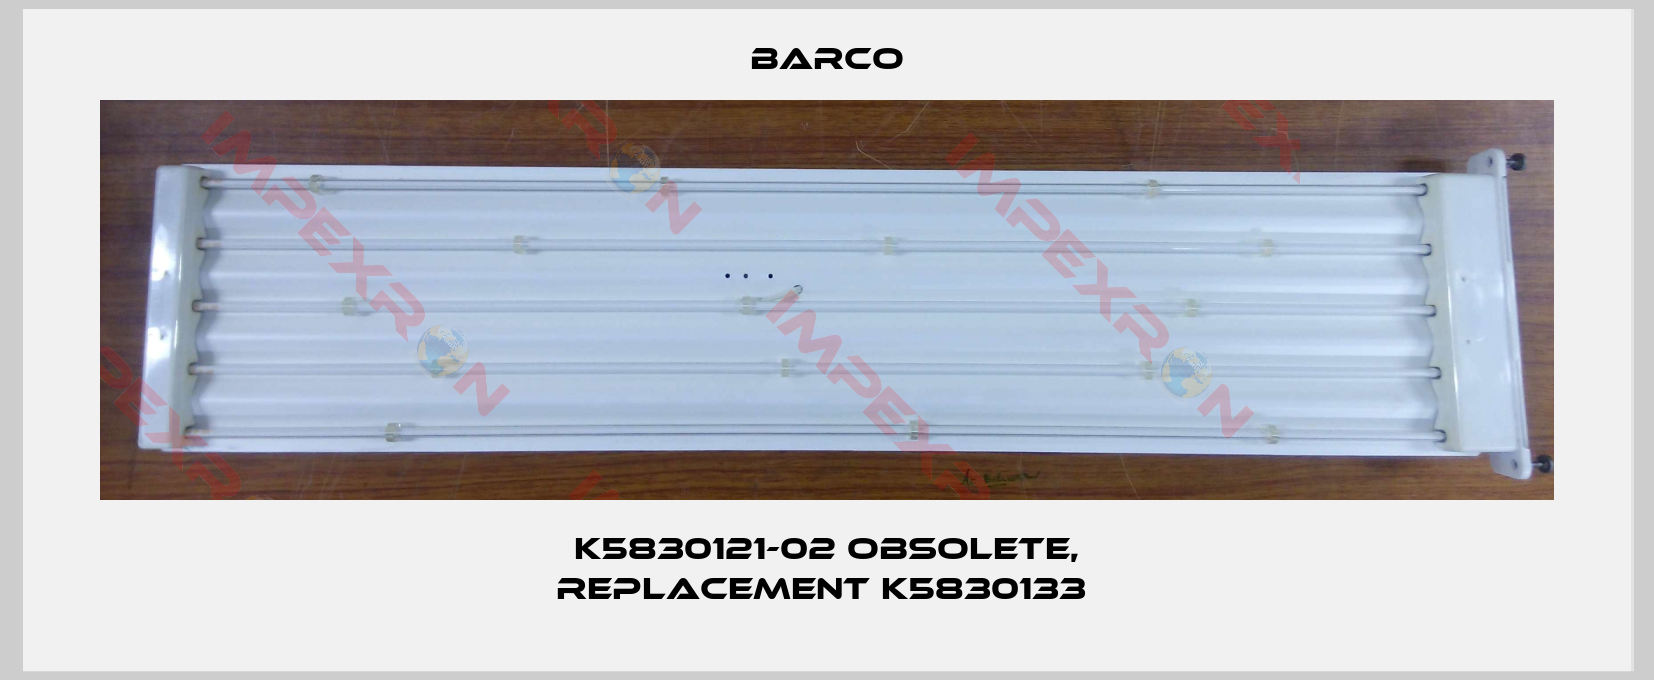 Barco-K5830121-02 obsolete, replacement K5830133 